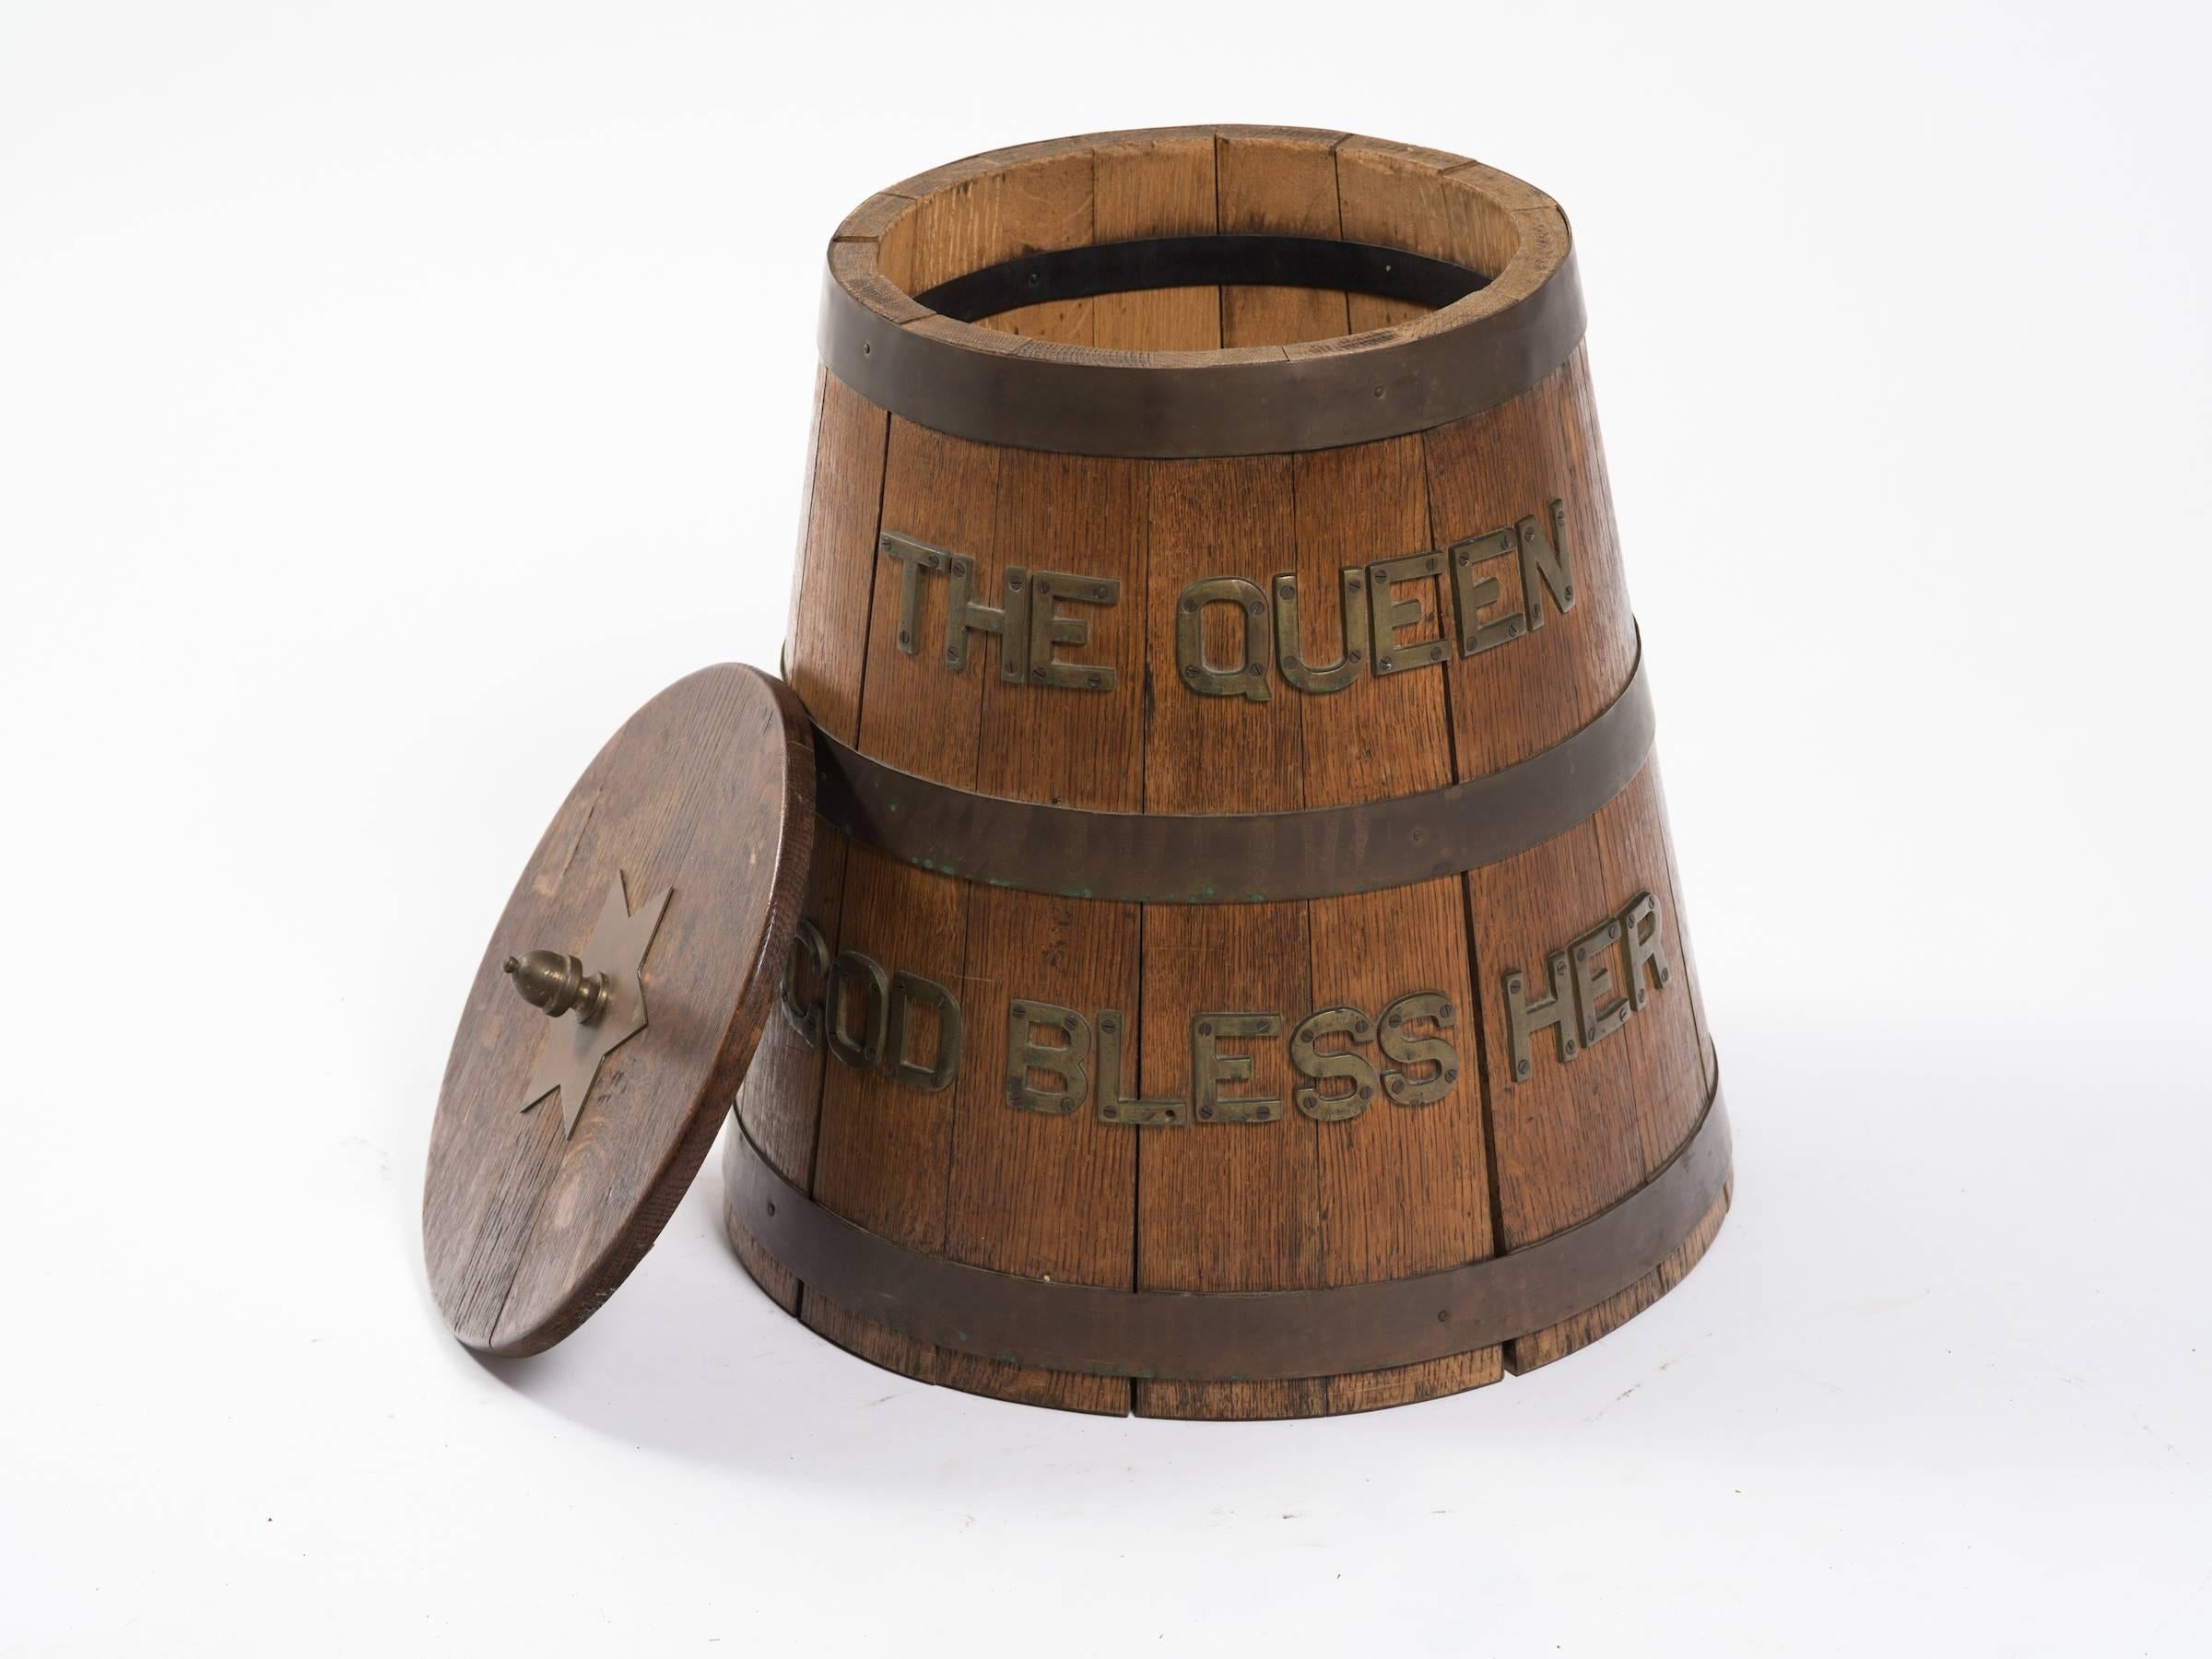 Oak storage barrel from an English ship that says 